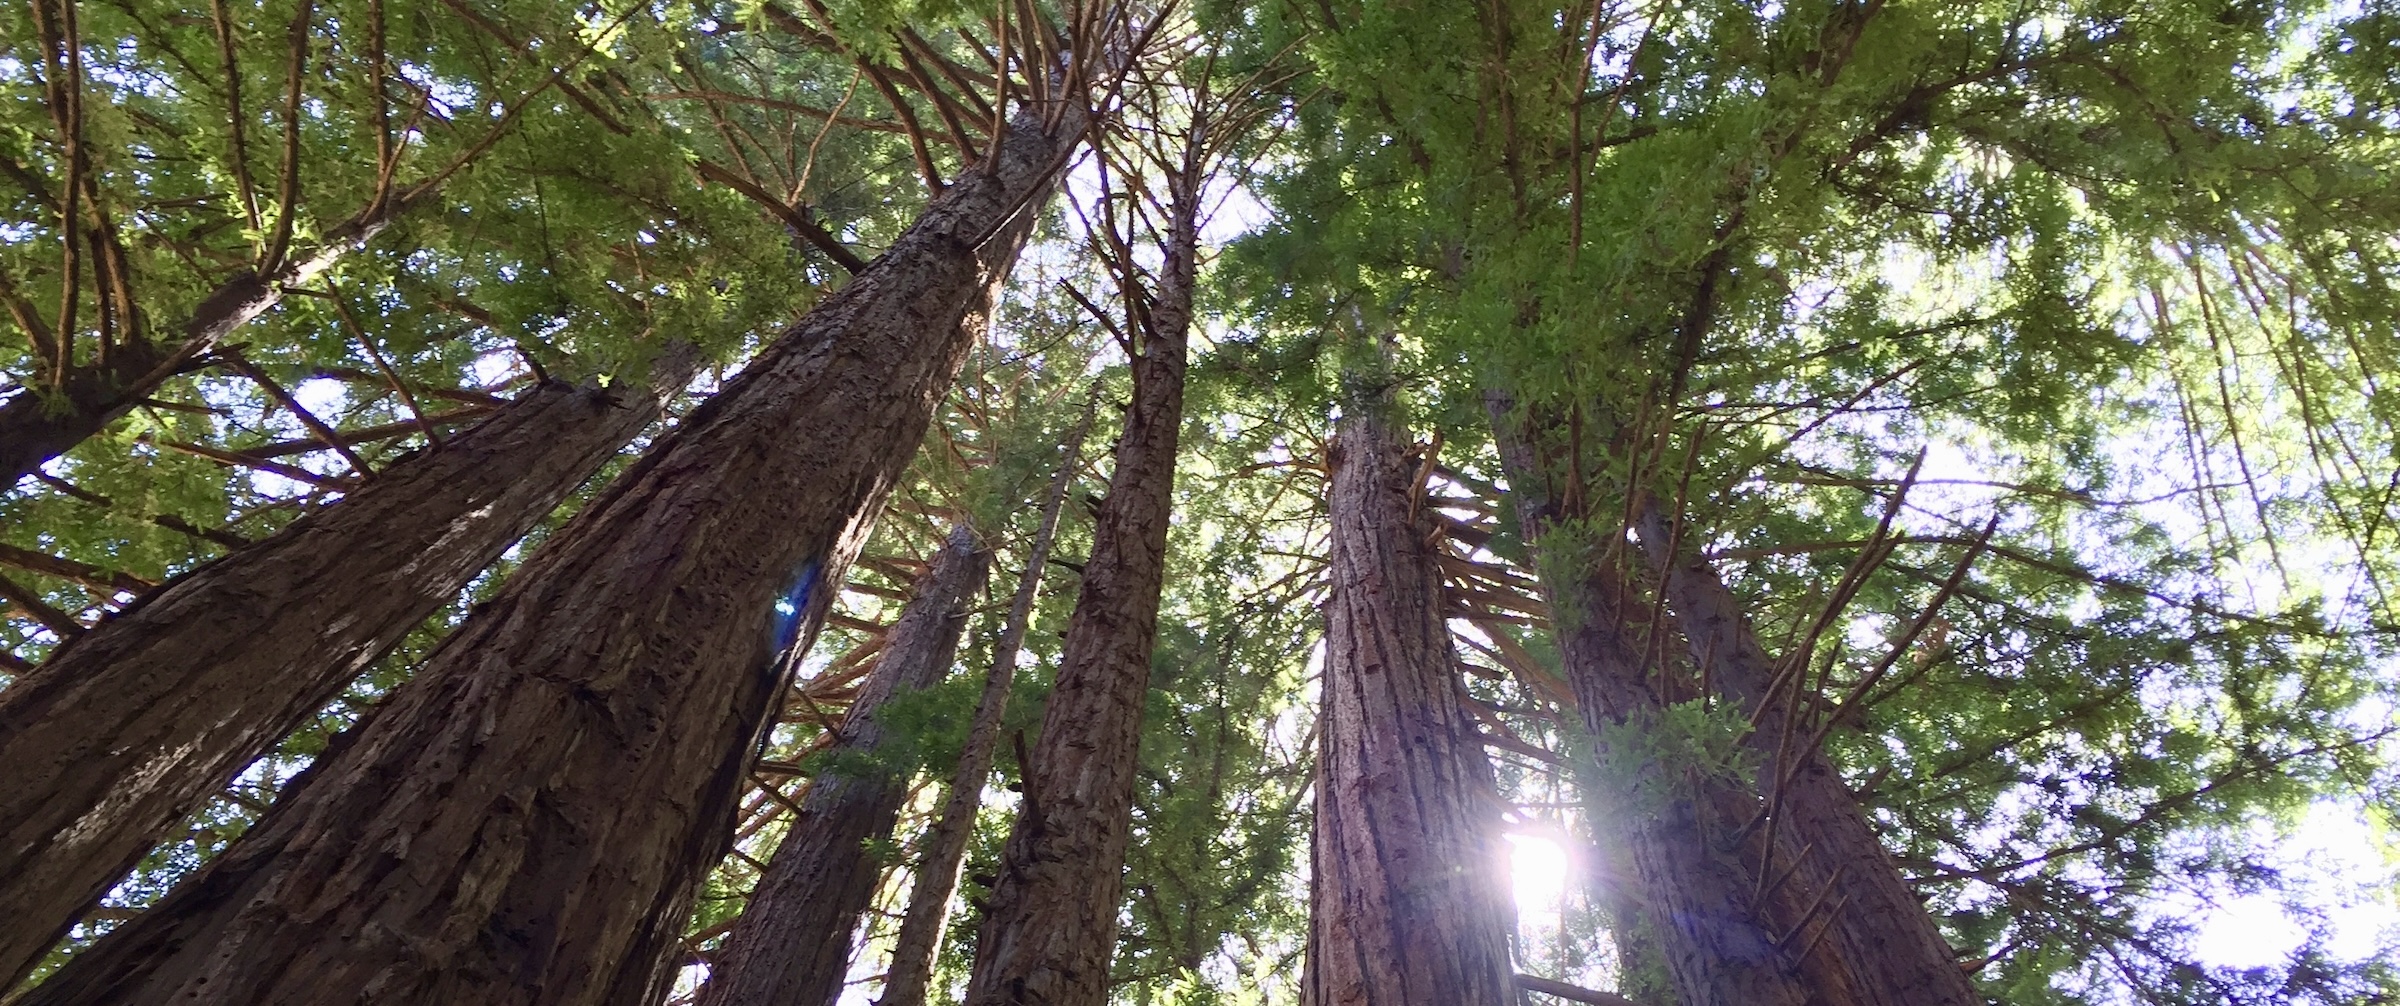 Sun shining through forest of redwood trees